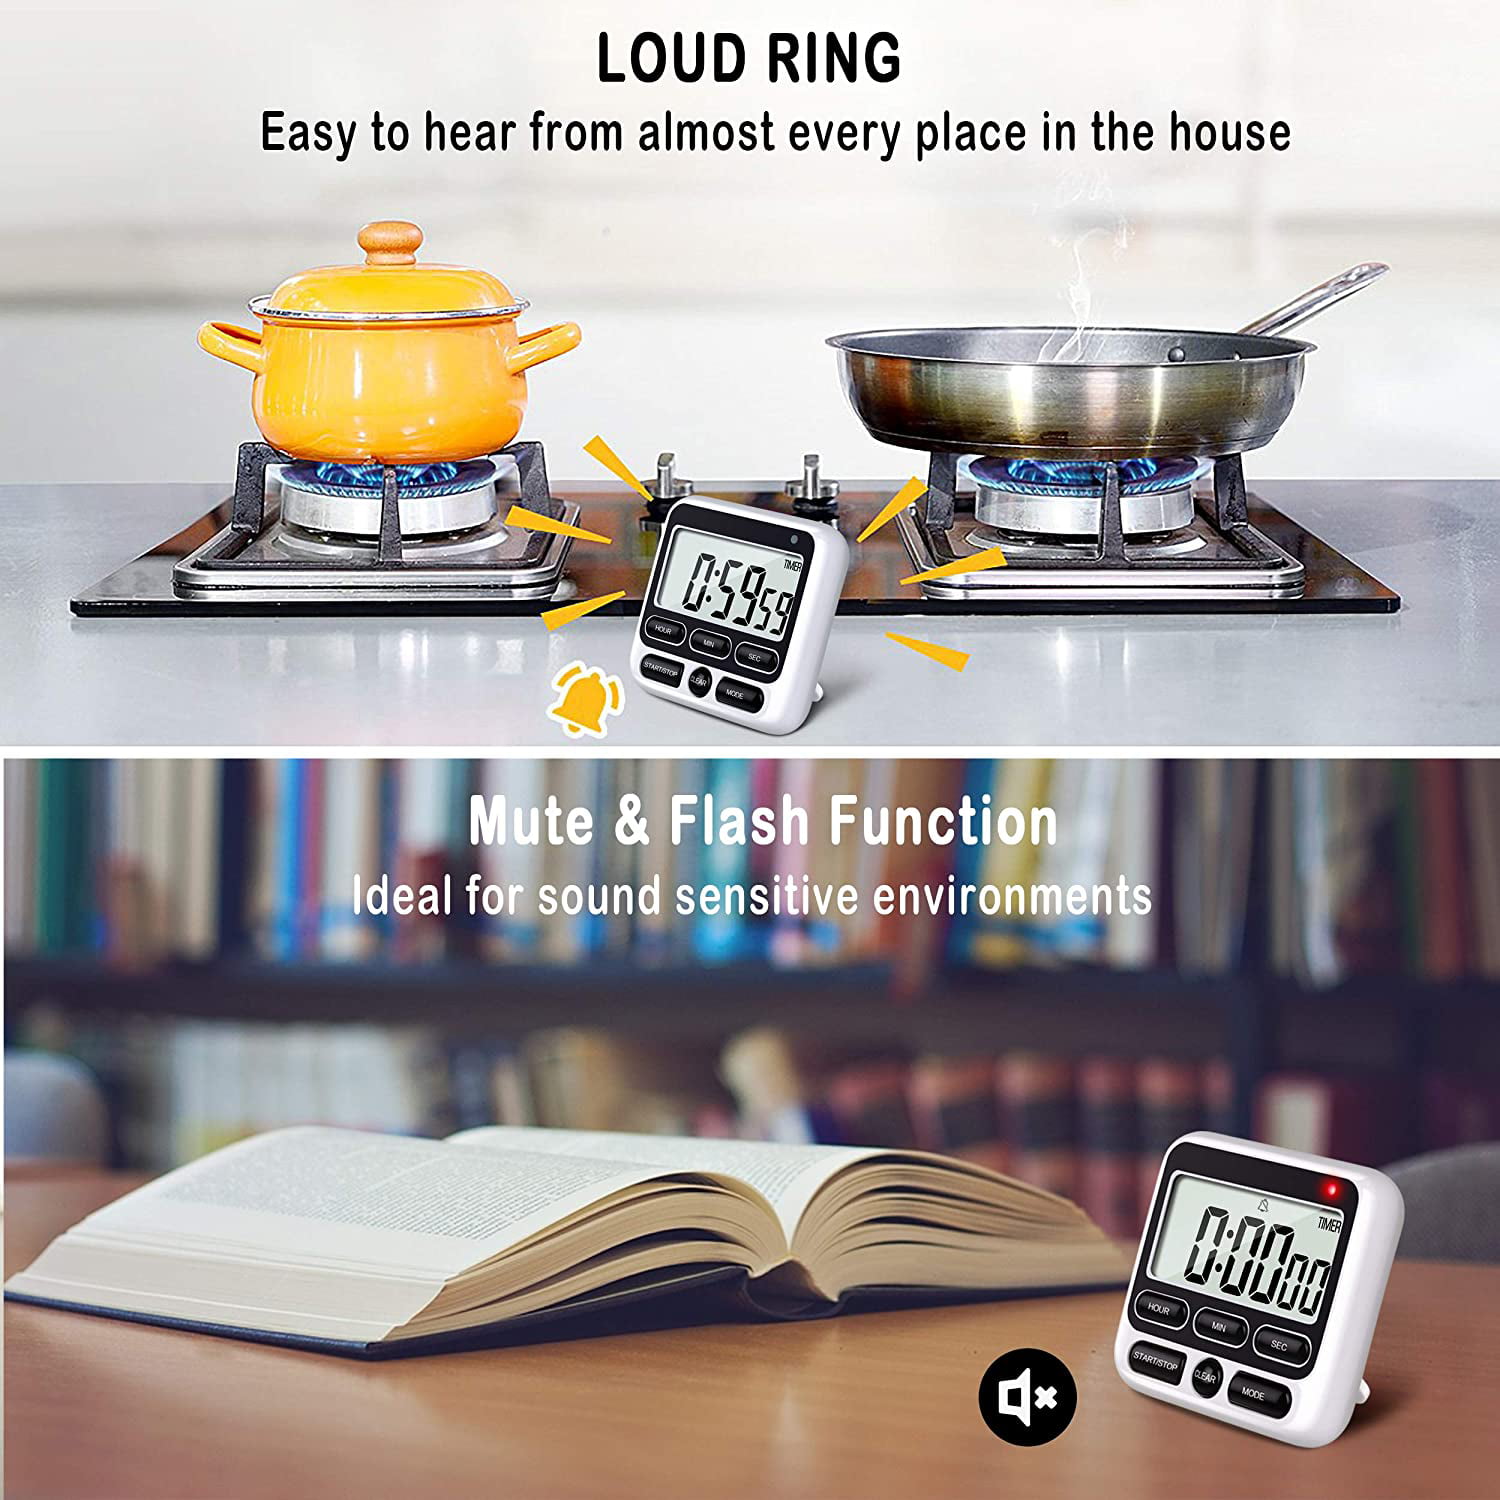 Kitchen Timer, 120DB Loud Digital Kitchen Timer, with Large LED Display,  Count UP Countdown Magnetic Countup Timer for Cooking, Oven, Teaching